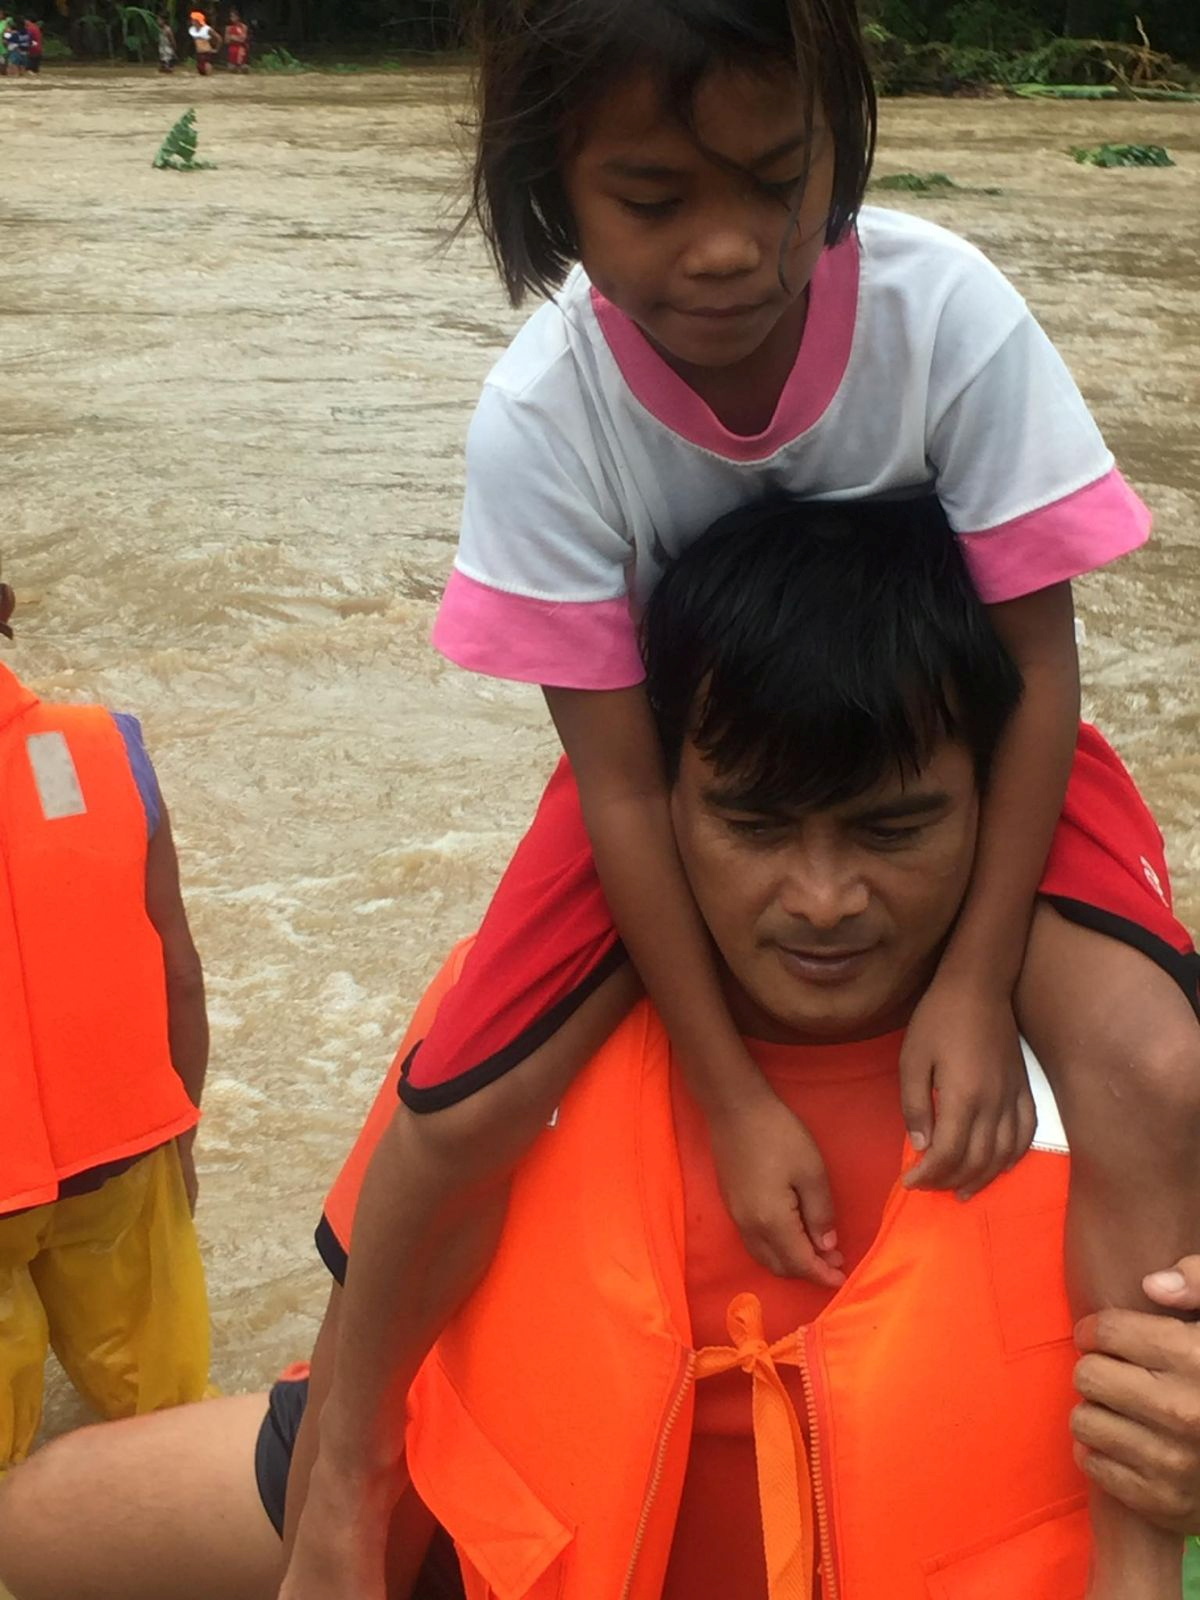 People cross floodwaters caused by tropical cyclone Kompasu during an evacuation assisted by the Philippine Coast Guard (PCG) at Brooke's Point, Palawan, in the Philippines